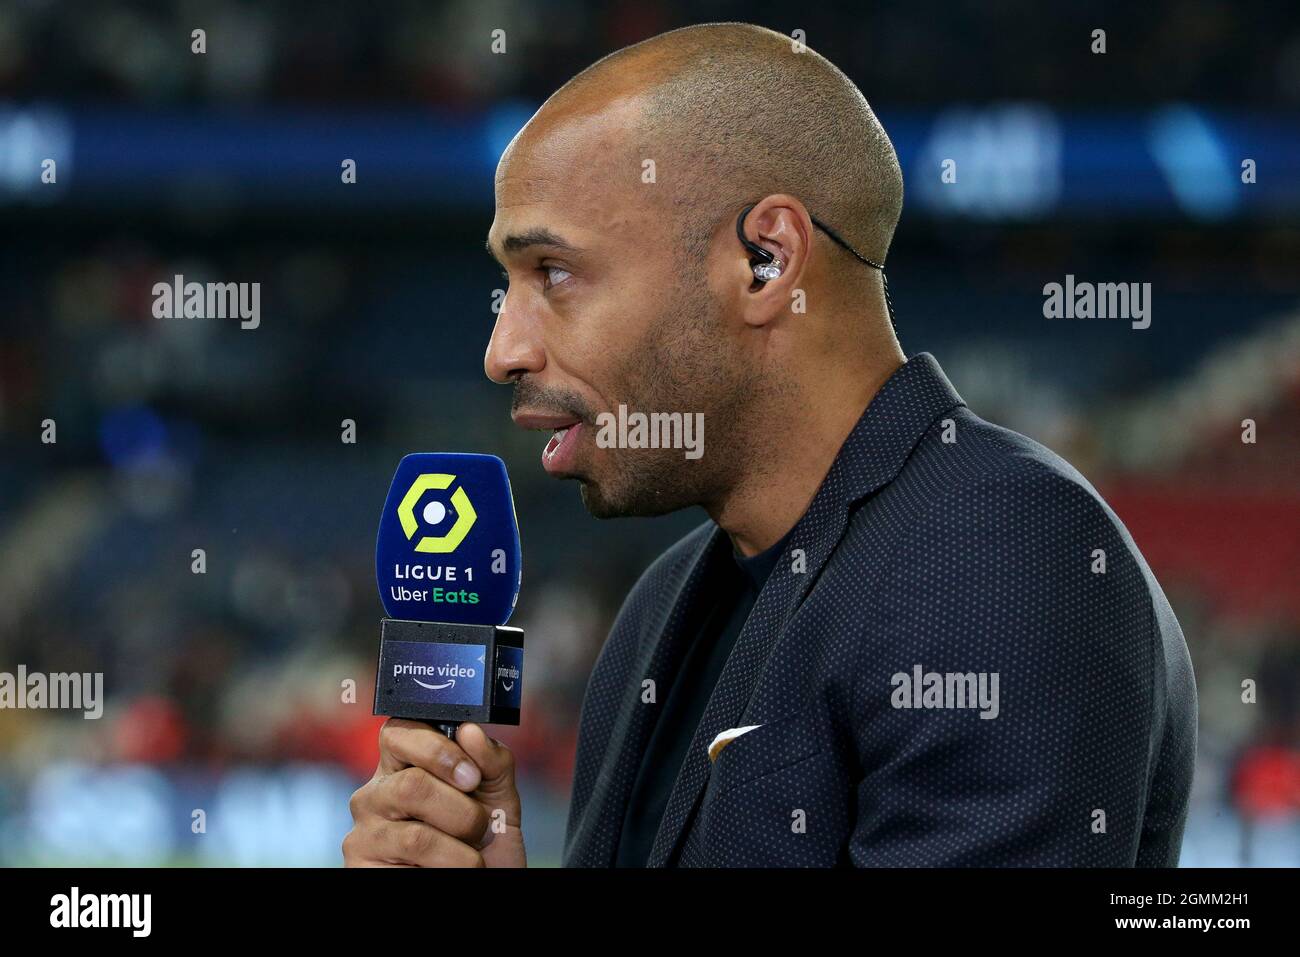 Paris, France. 19th Sep, 2021. Thierry Henry, pundit for Amazon Prime,  comments the French championship Ligue 1 football match between Paris  Saint-Germain (PSG) and Olympique Lyonnais on September 19, 2021 at Parc